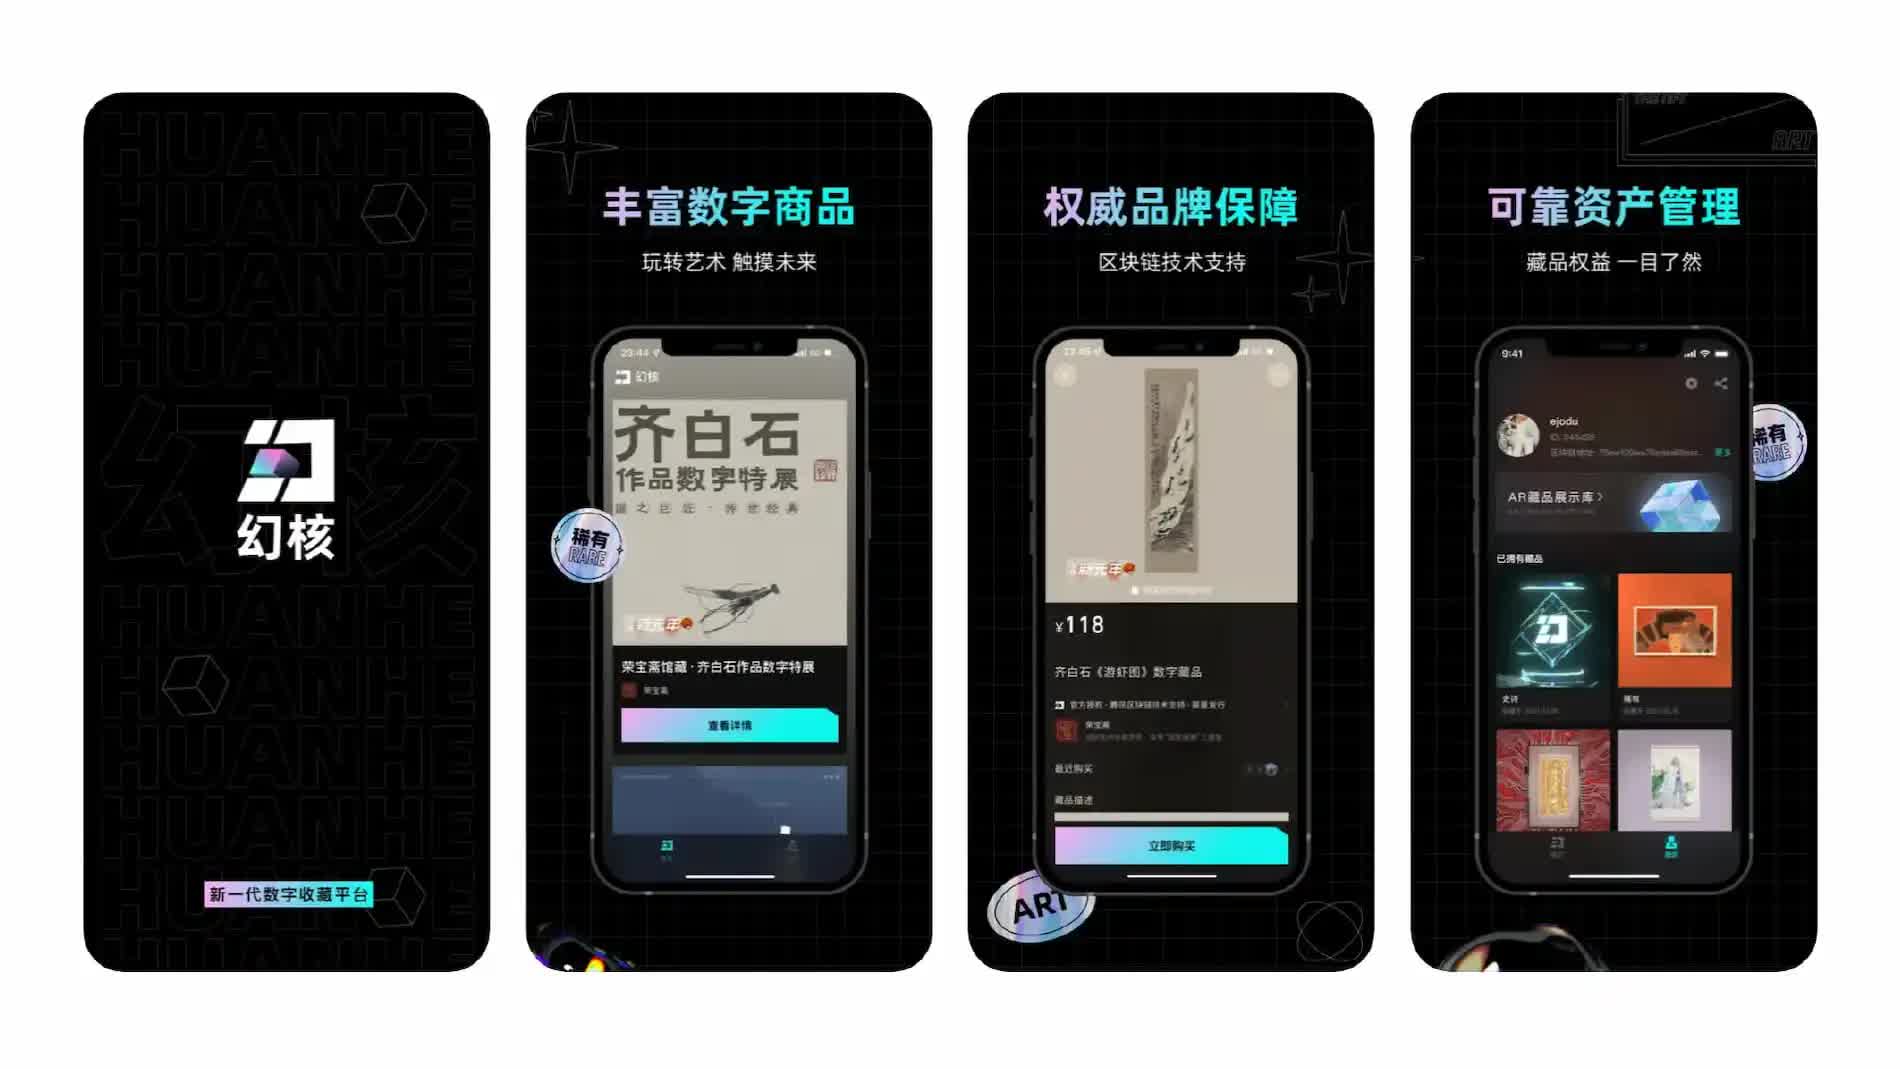 Overview of the Huanhe app